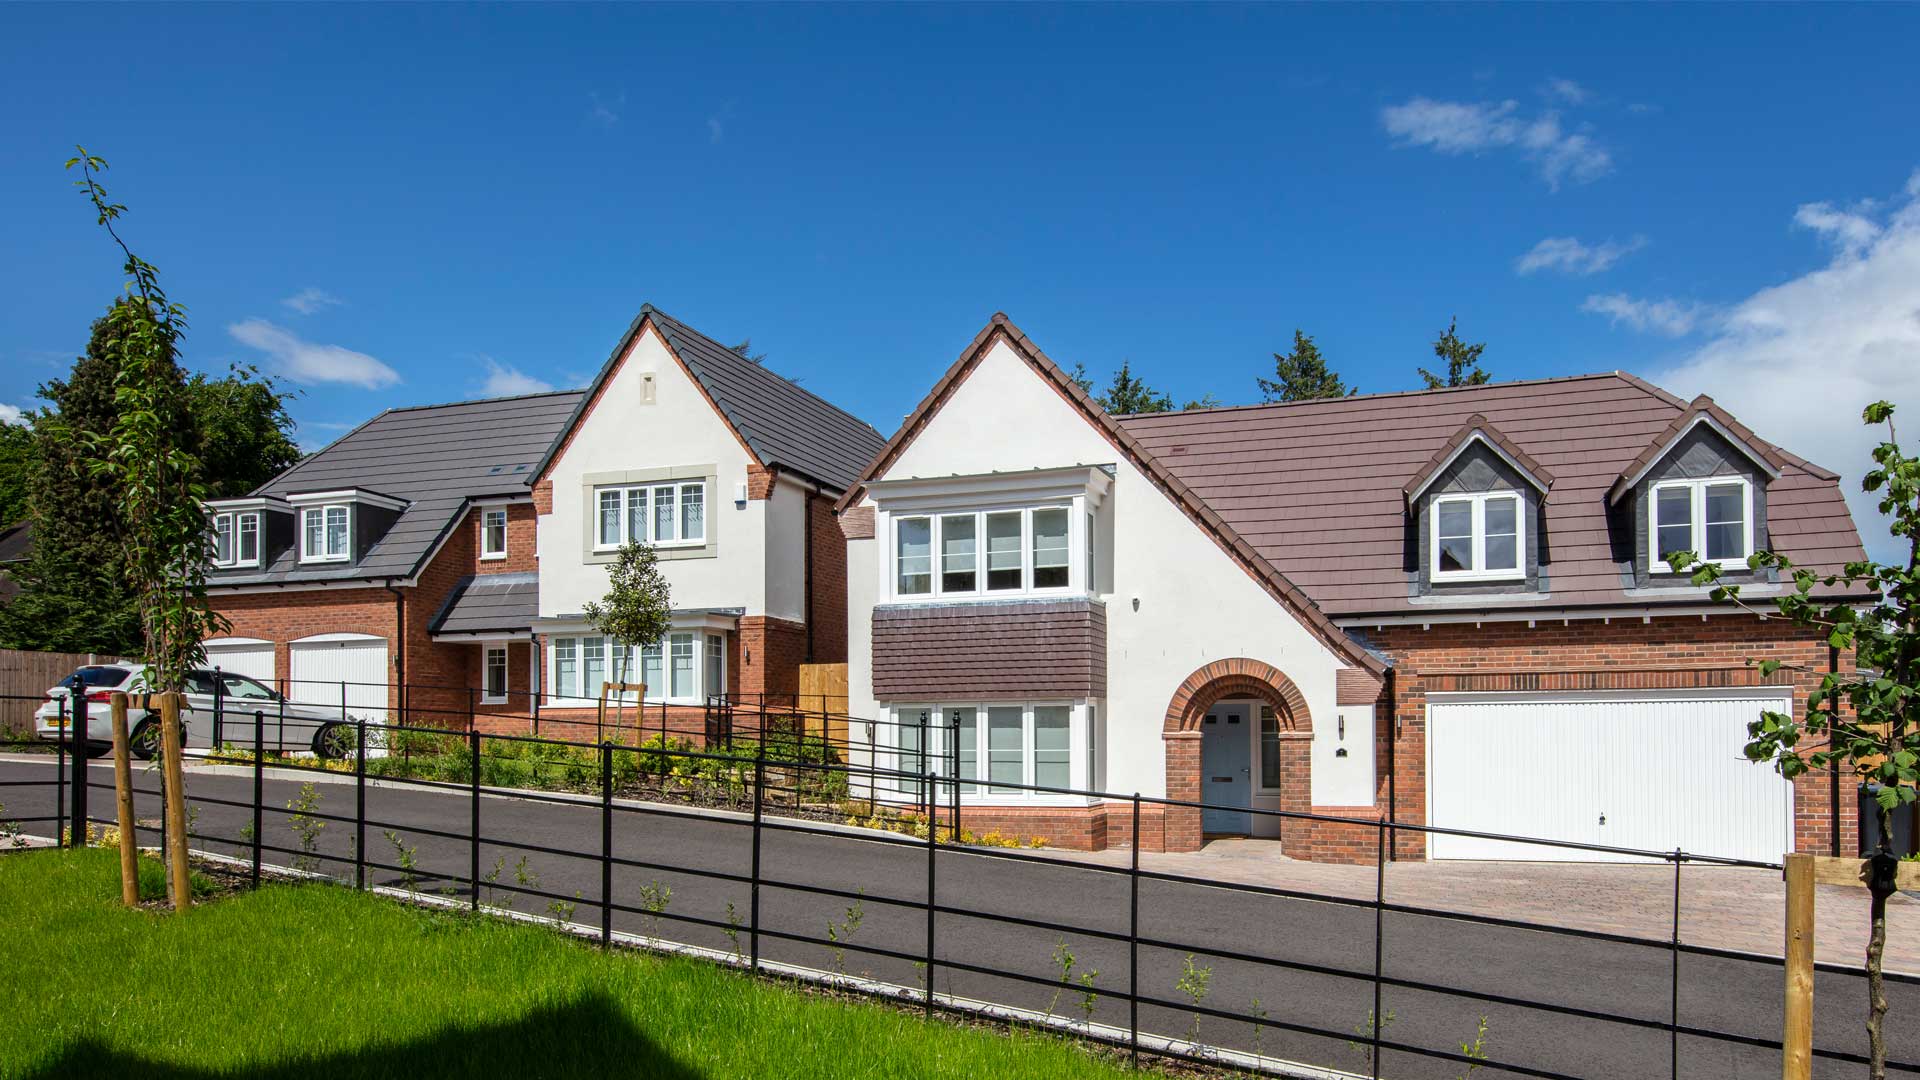 New homes in West Midlands, Cheltenham and Gloucester